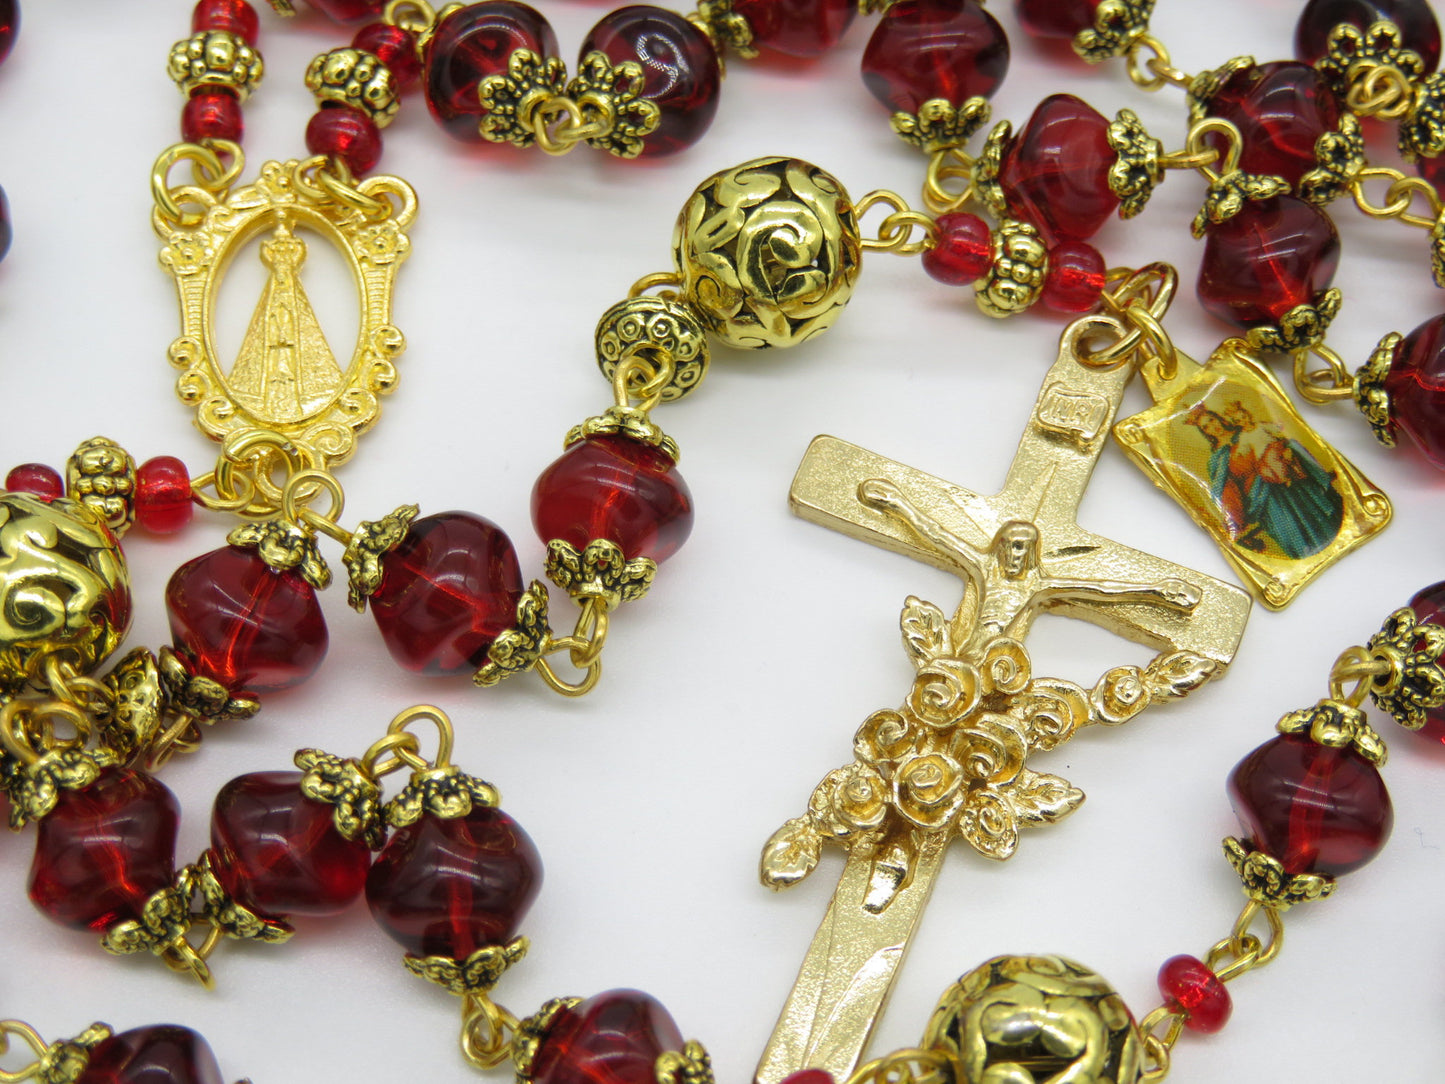 Our Lady of Loretto Rosary prayer beads, Red Glass and gold Rosaries, Saint Therese Crucifix, Sacramental Rosaries, religious gift.